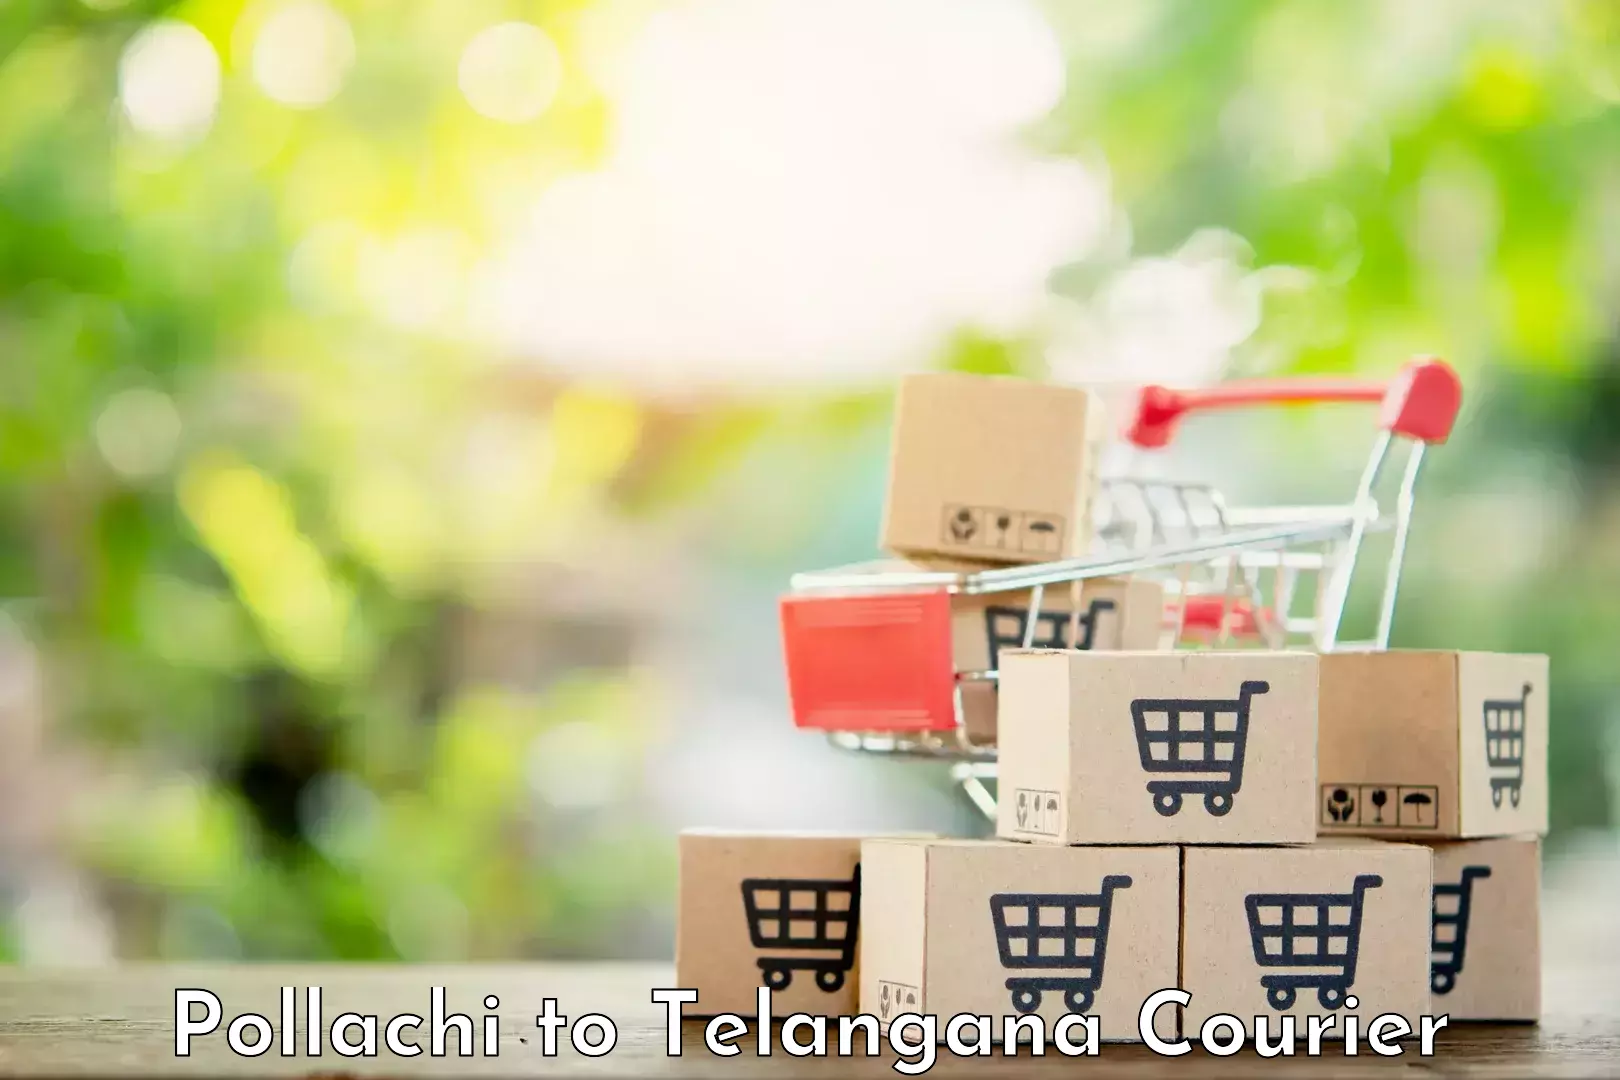 User-friendly courier app Pollachi to Mahadevpur